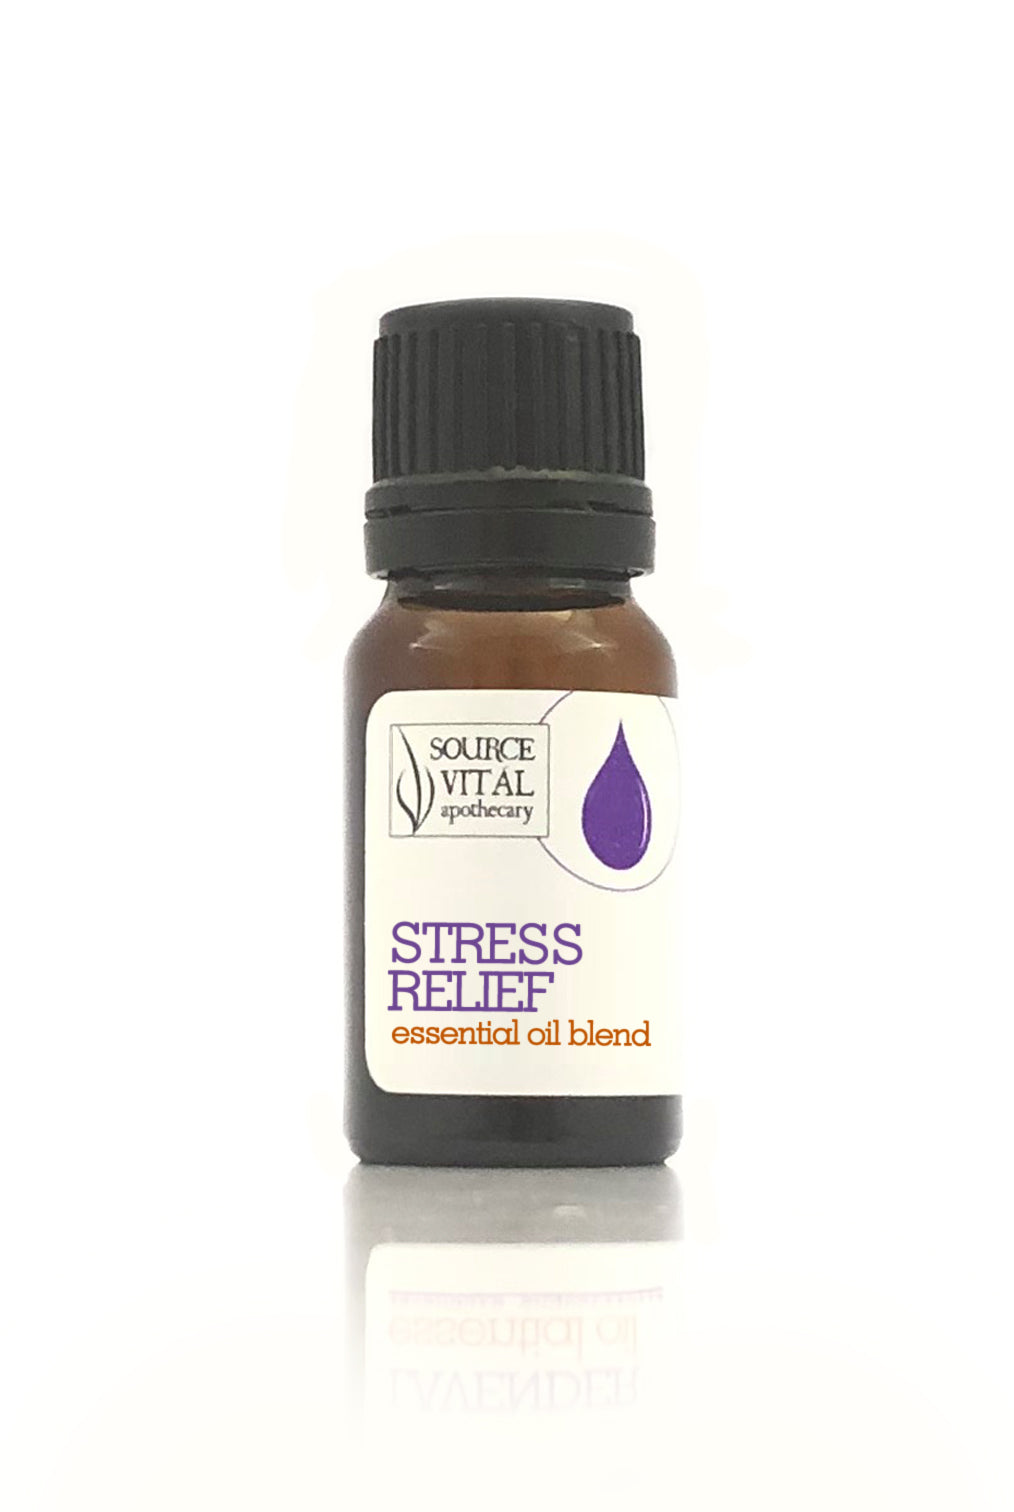 Calm Essential Oil Blend 2 oz - Stress Relief Relaxation Gifts for